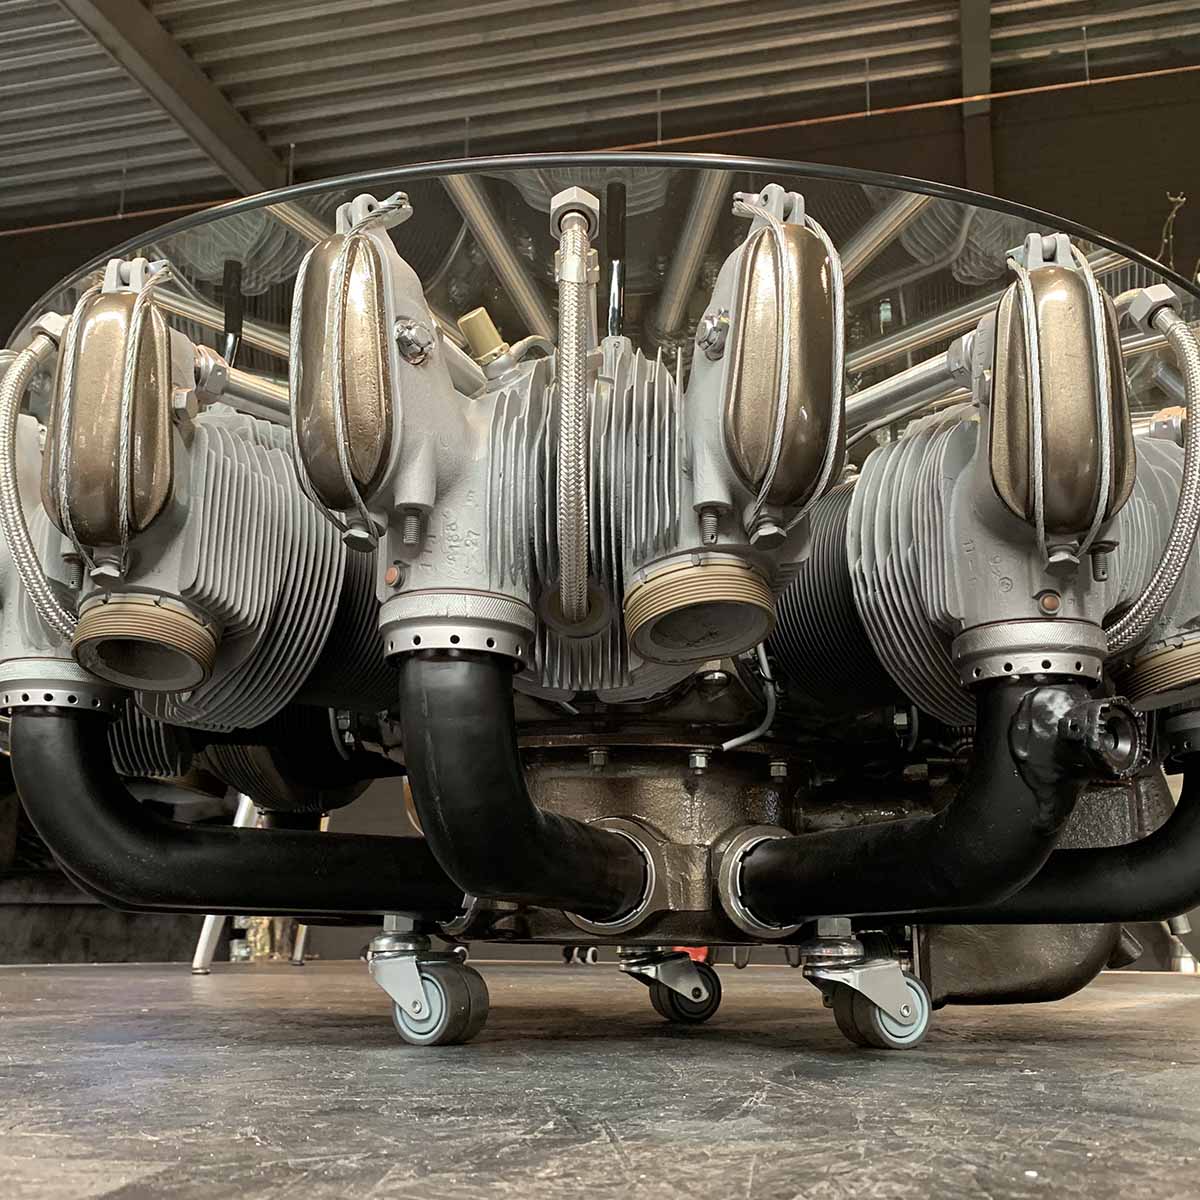 Underside view of a Vedeneyev M14V helicopter engine turned into a table.